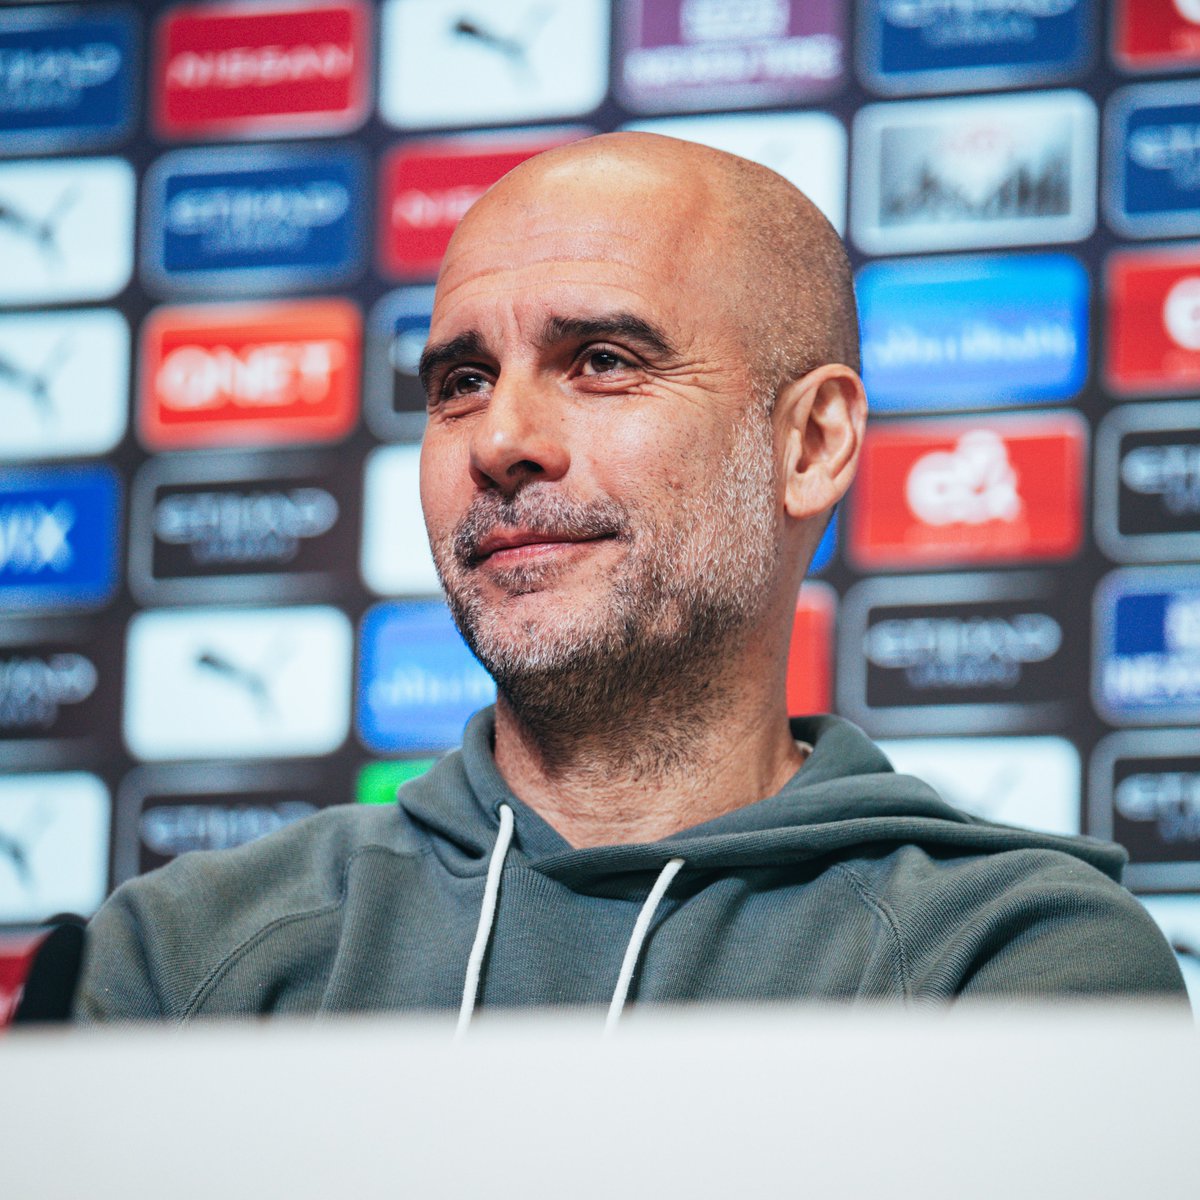 PEP 💬 The job the academy has done over the years is incredible. They help them to be better players. All of them are professional and will have long careers. It’s so nice.